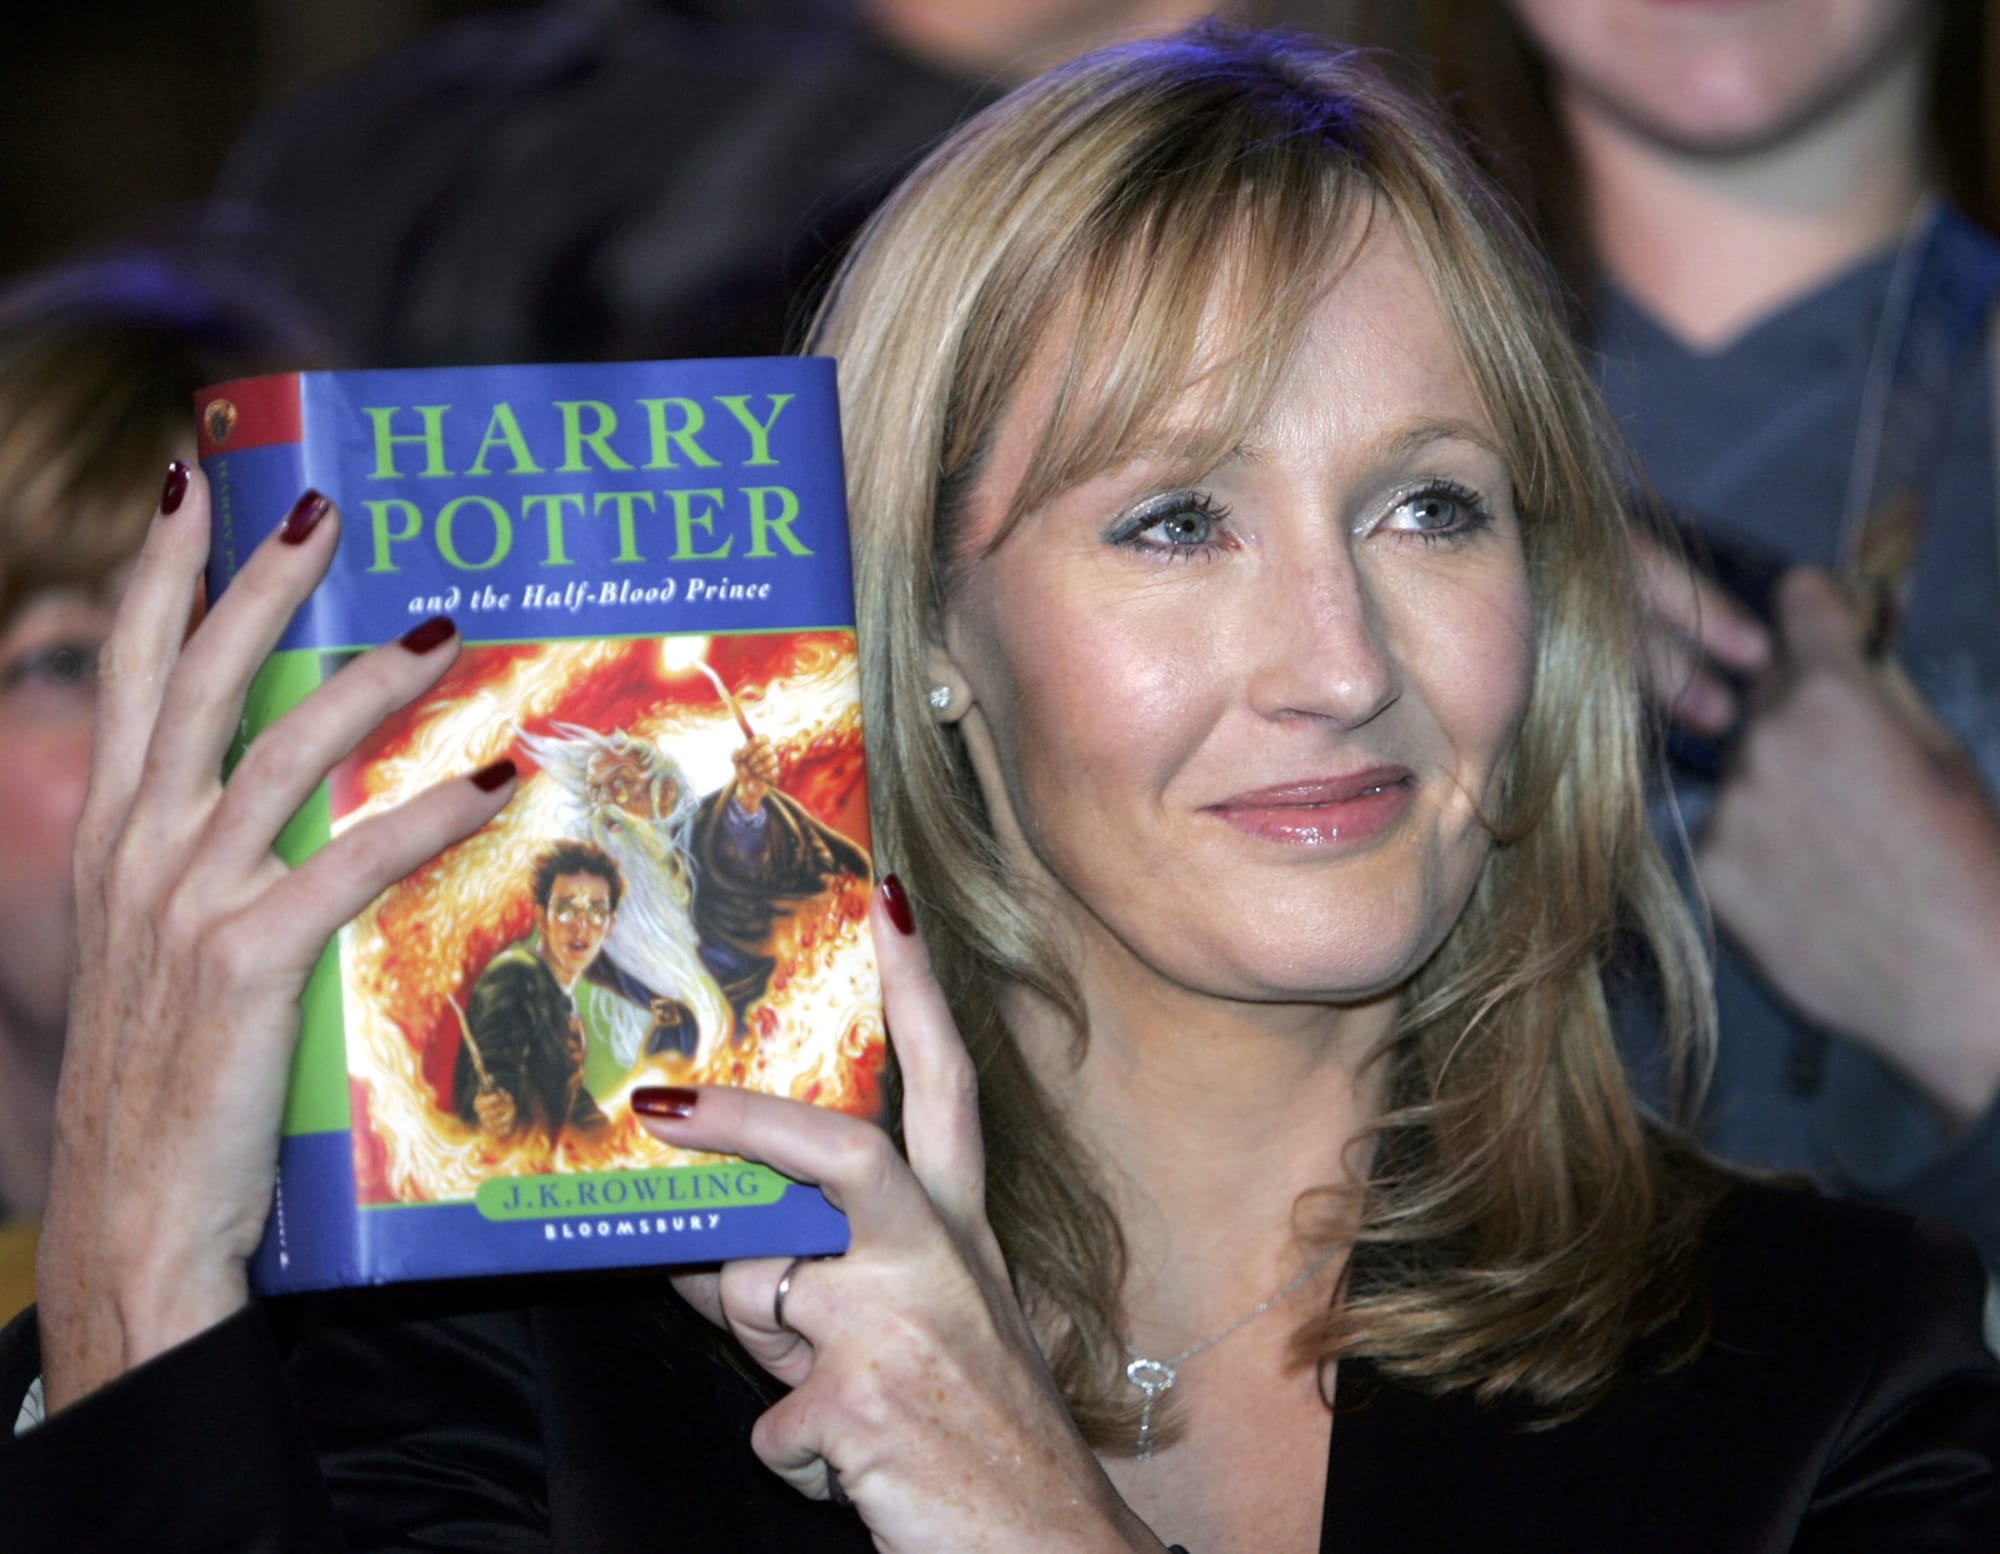 Journalist stopped from asking Tom Felton about J.K. Rowling